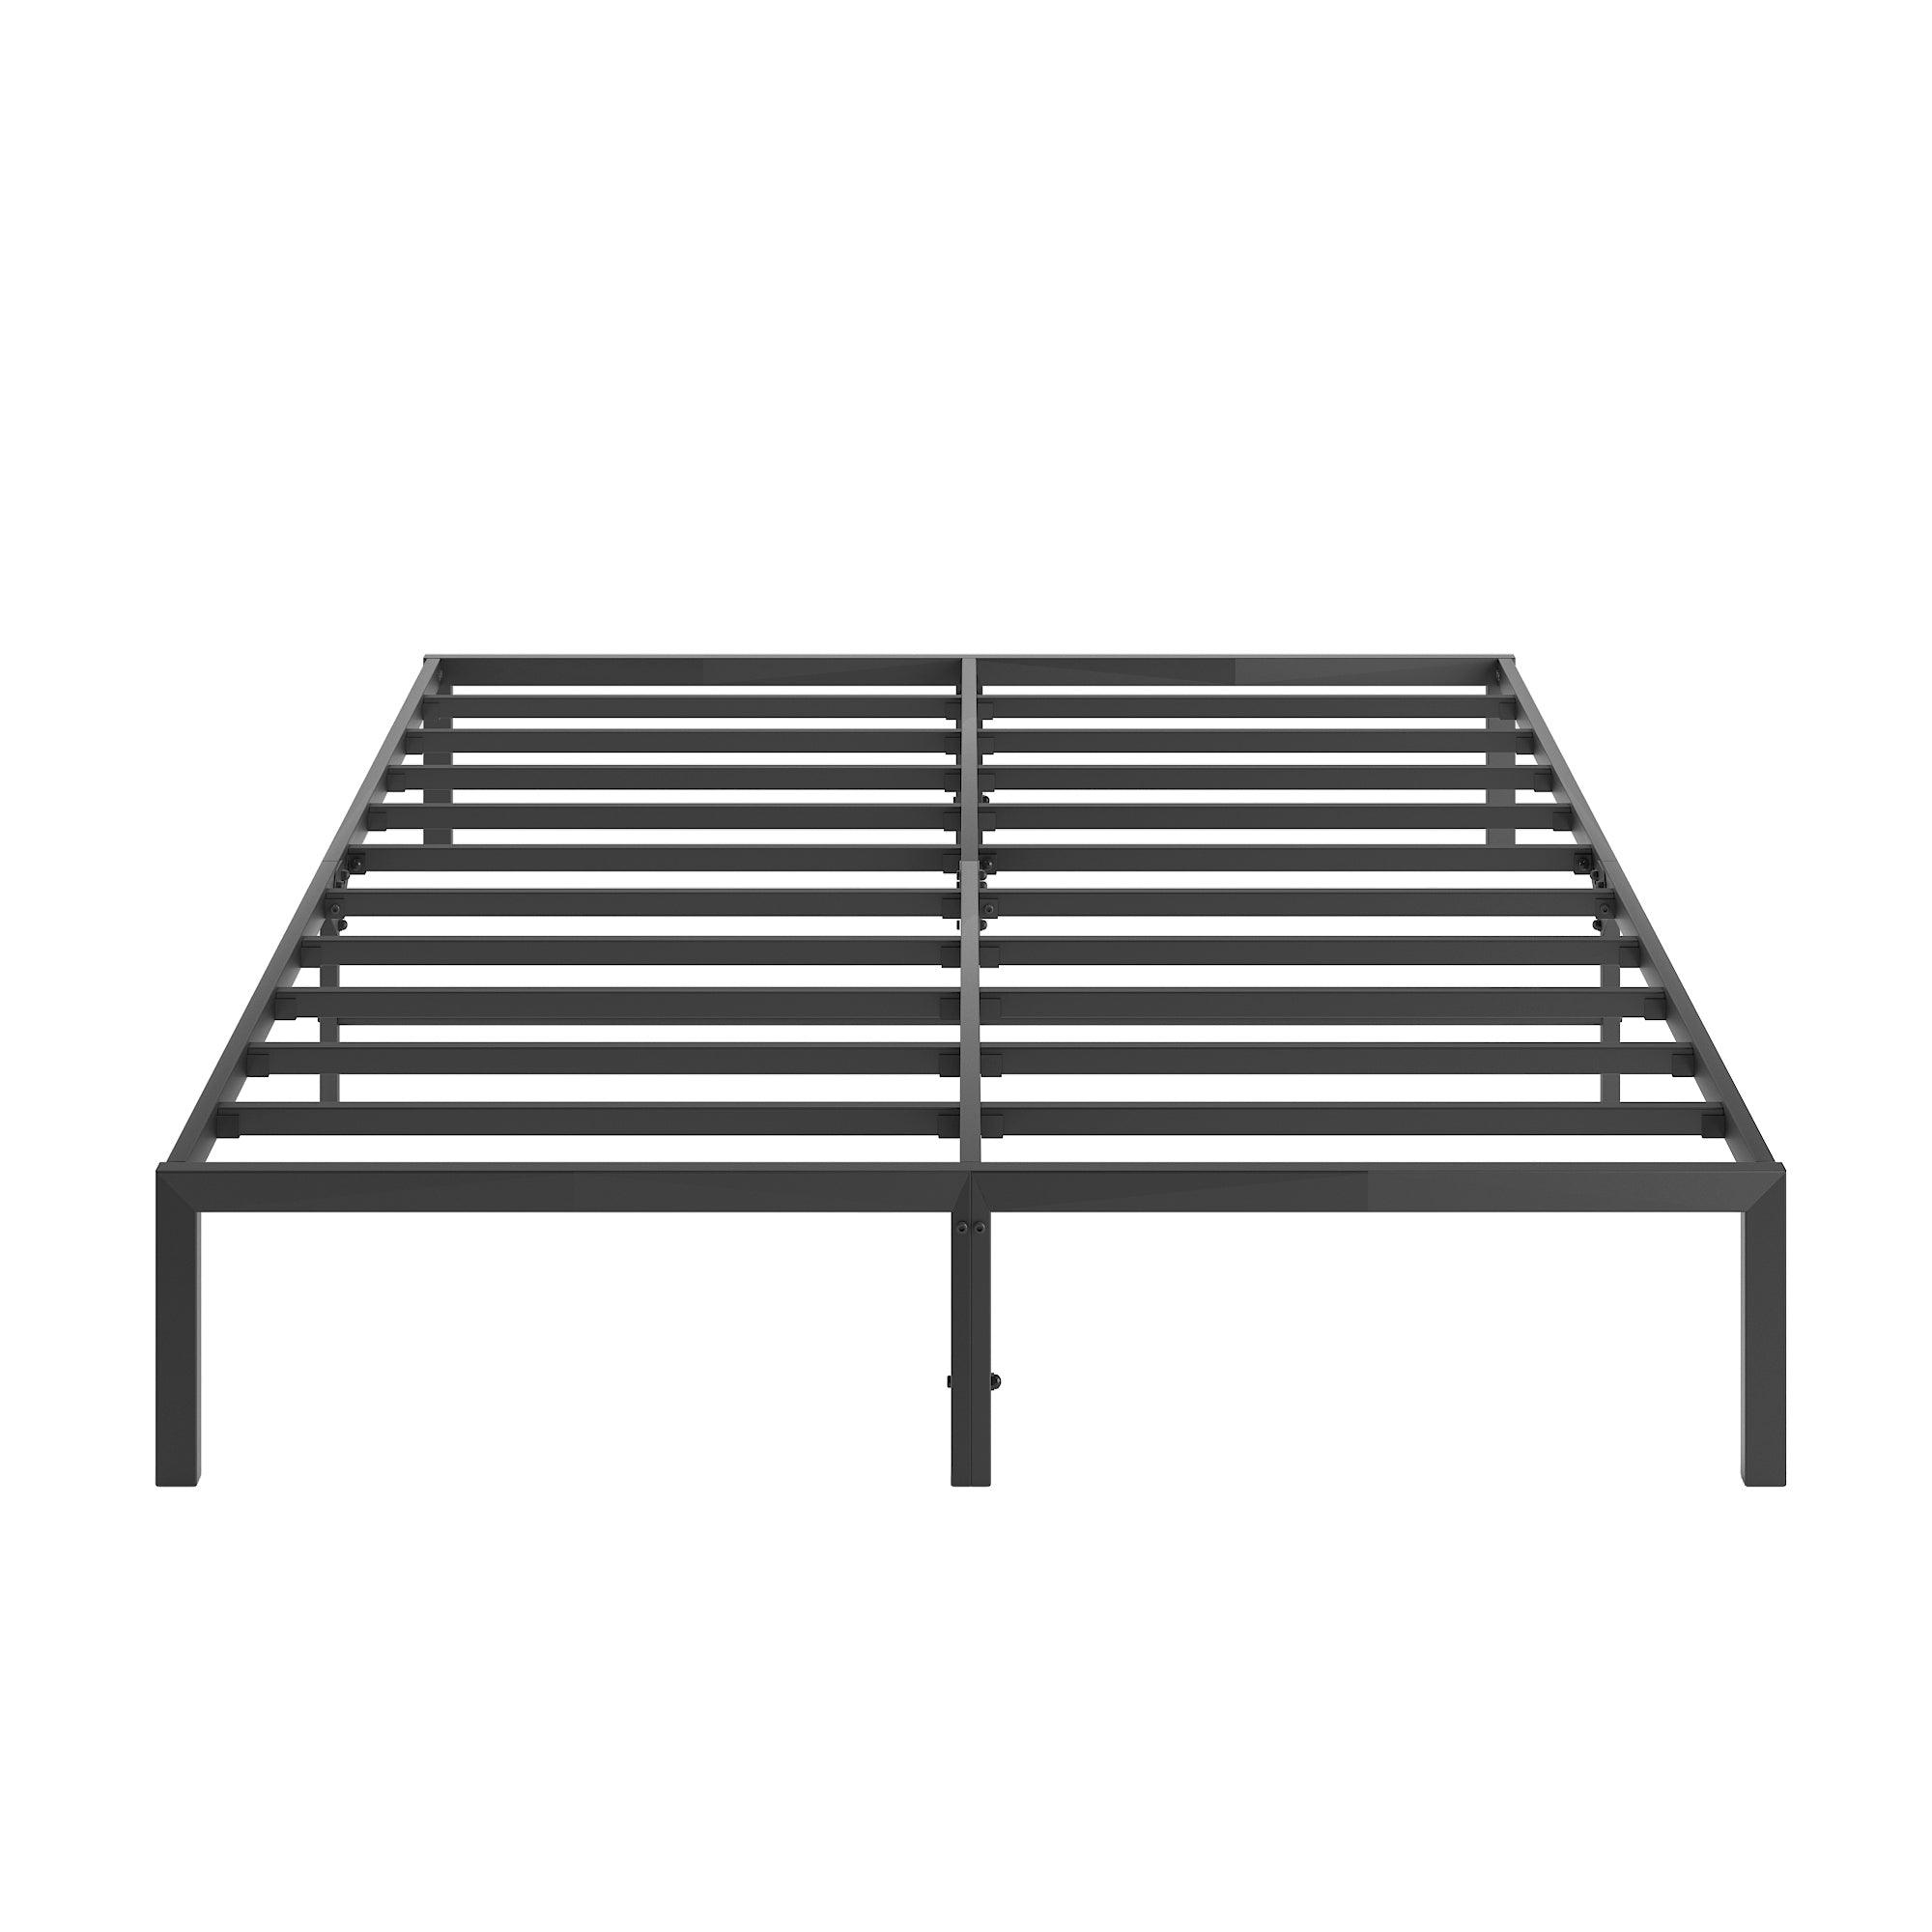 14" Metal Platform Bed Frame, No Box Spring Needed - Twin Size